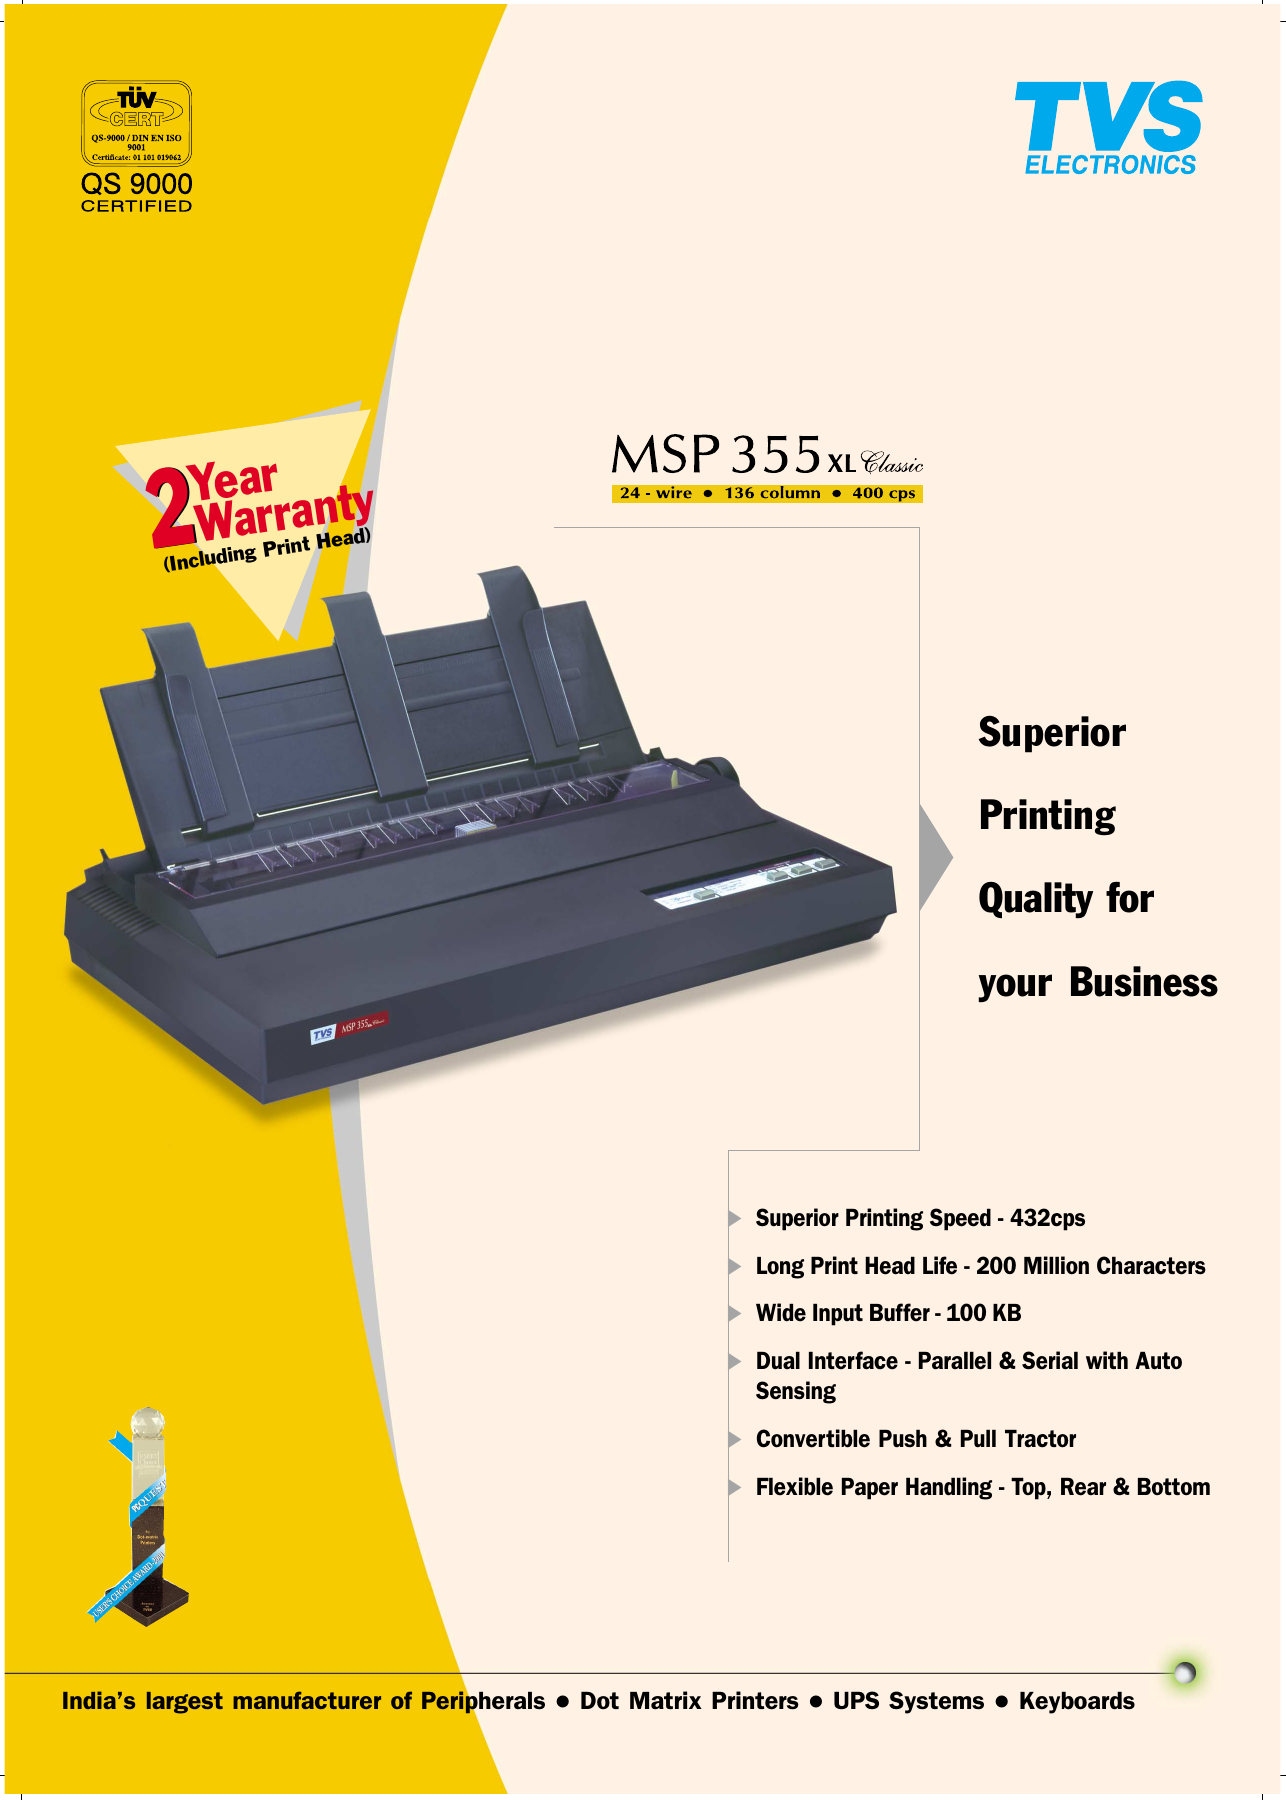 Indias largest manufacturer of Peripherals l Dot Matrix Printers l UPS Systems l KeyboardsSuperiorPrintingQuality foryour Business Warranty22Year(Including Print Head)uSuperior Printing Speed - 432cpsuLong Print Head Life - 200 Million CharactersuWide Input Buffer - 100 KBuDual Interface - Parallel &amp; Serial with AutoSensinguConvertible Push &amp; Pull TractoruFlexible Paper Handling - Top, Rear &amp; Bottom